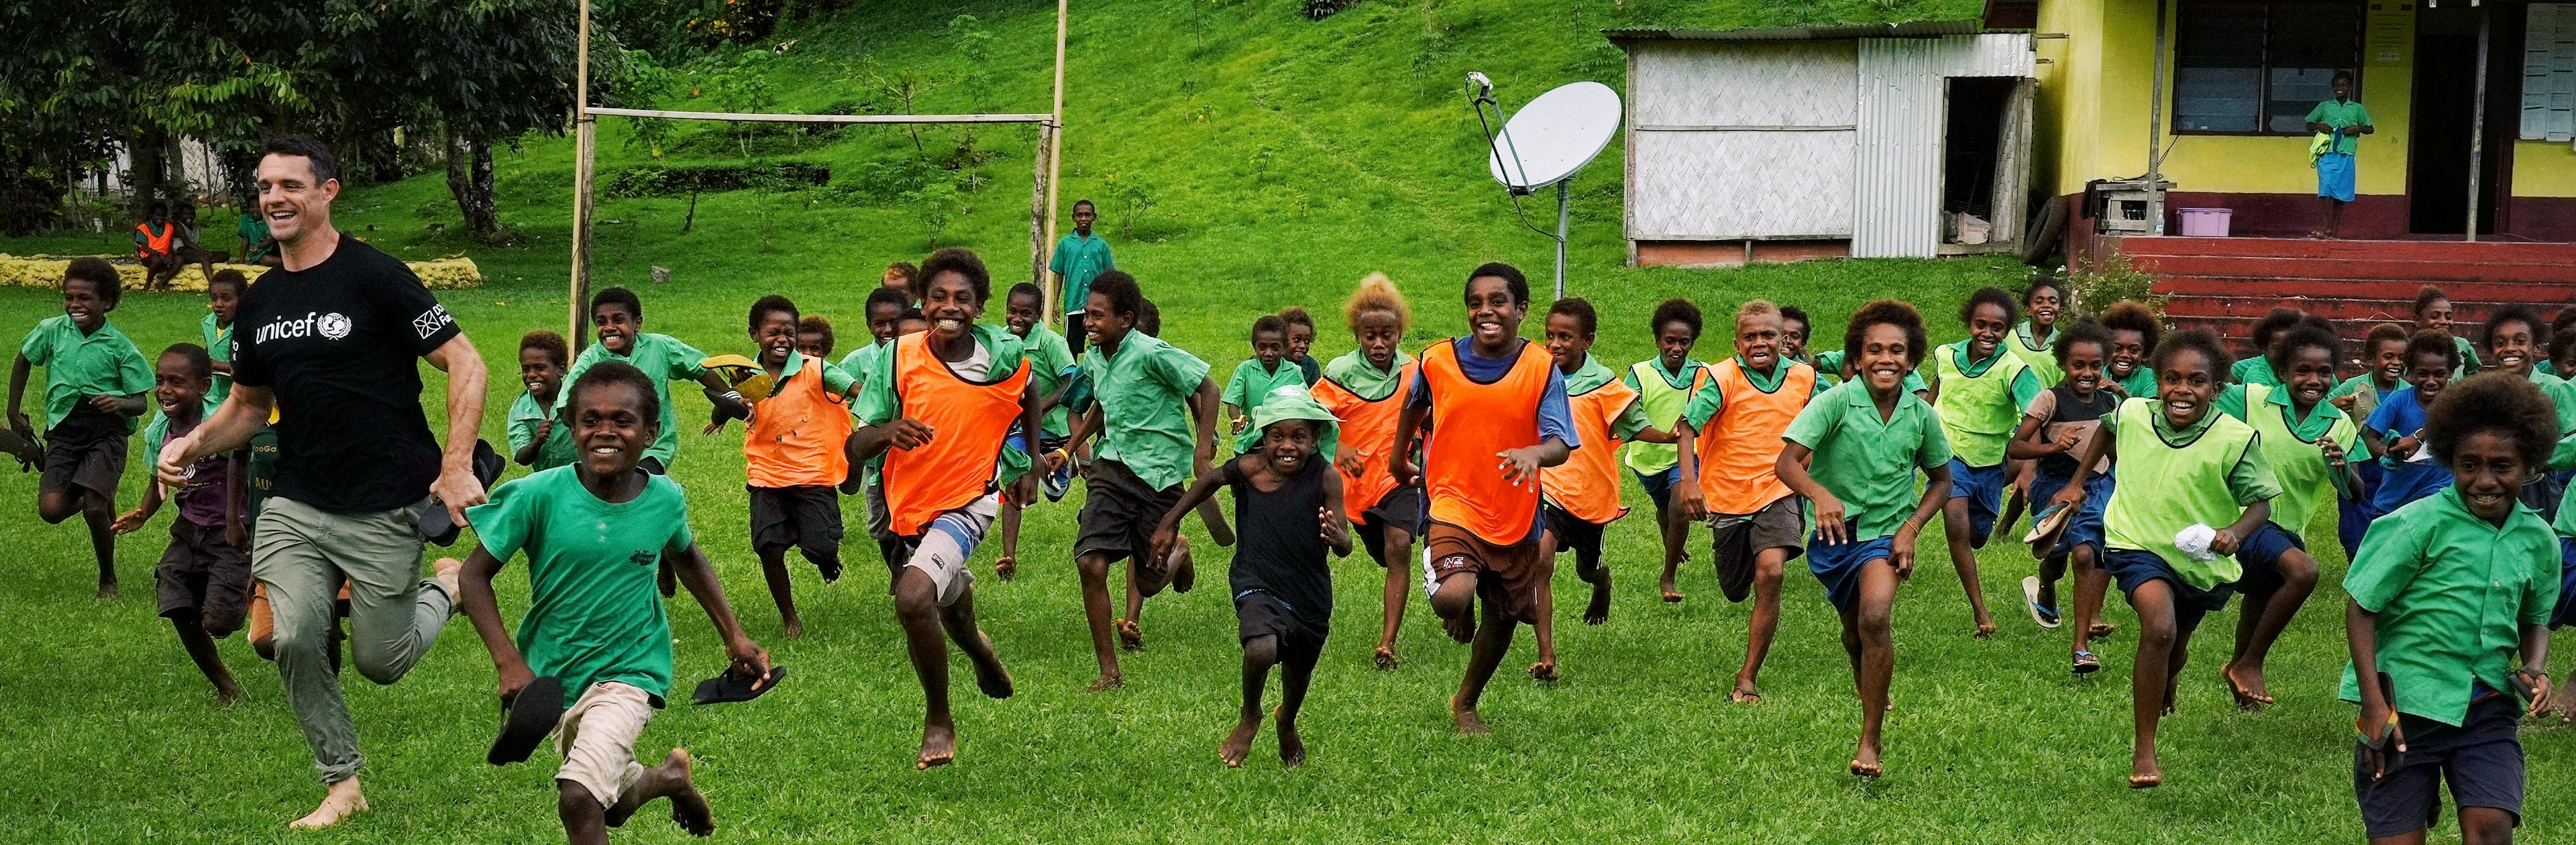 Dan Carter and school kids in Vanuatu playing rugby on the field